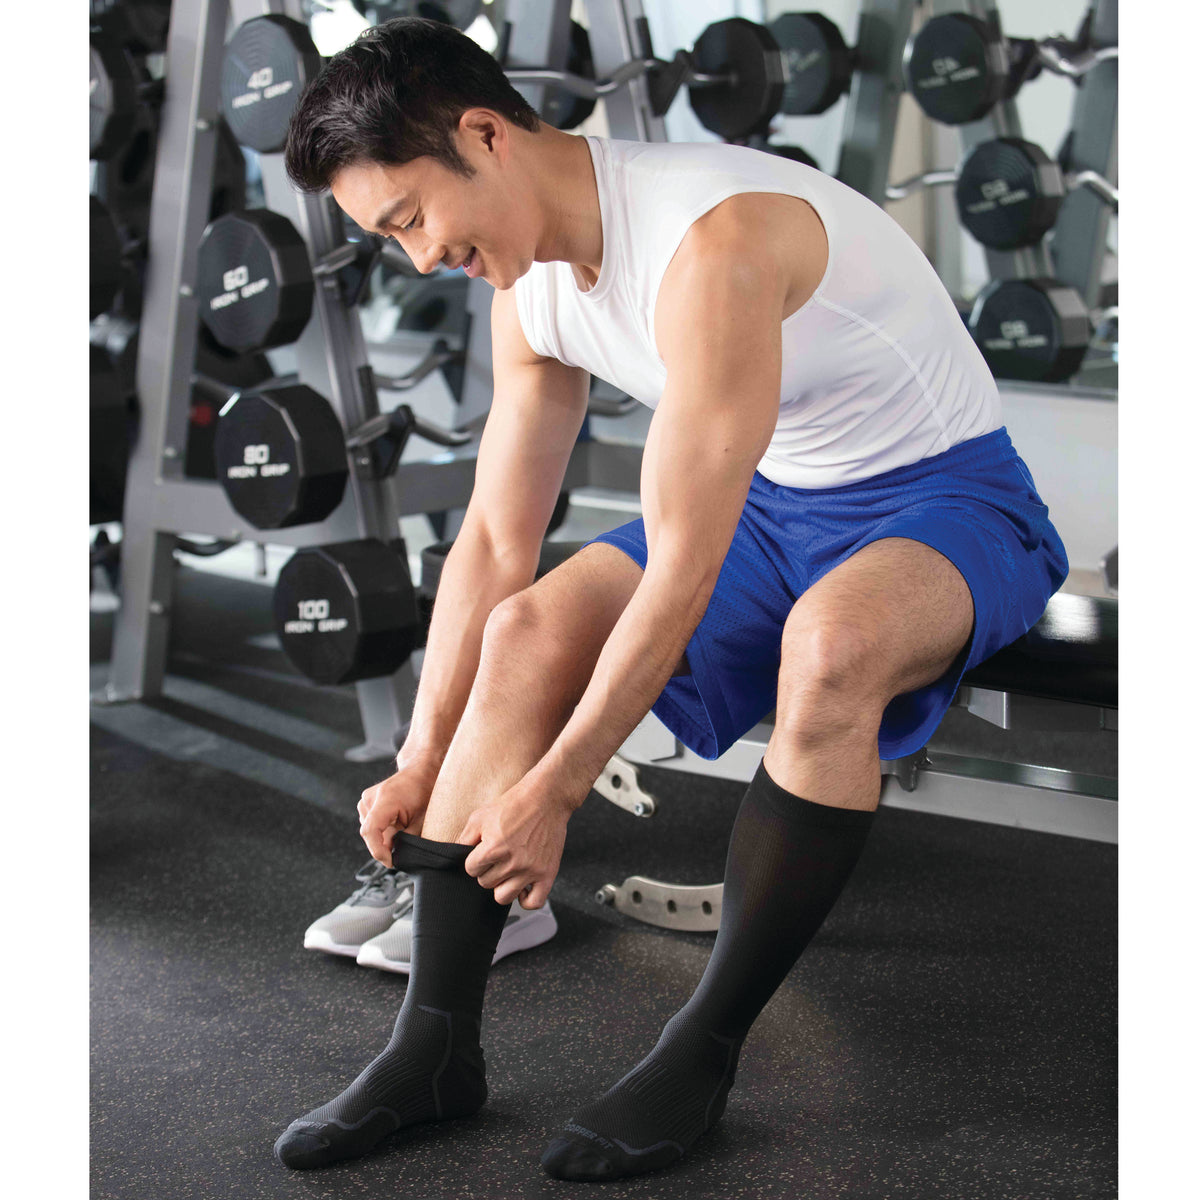 Compression Socks for All-Day Comfort, Energy & Swelling